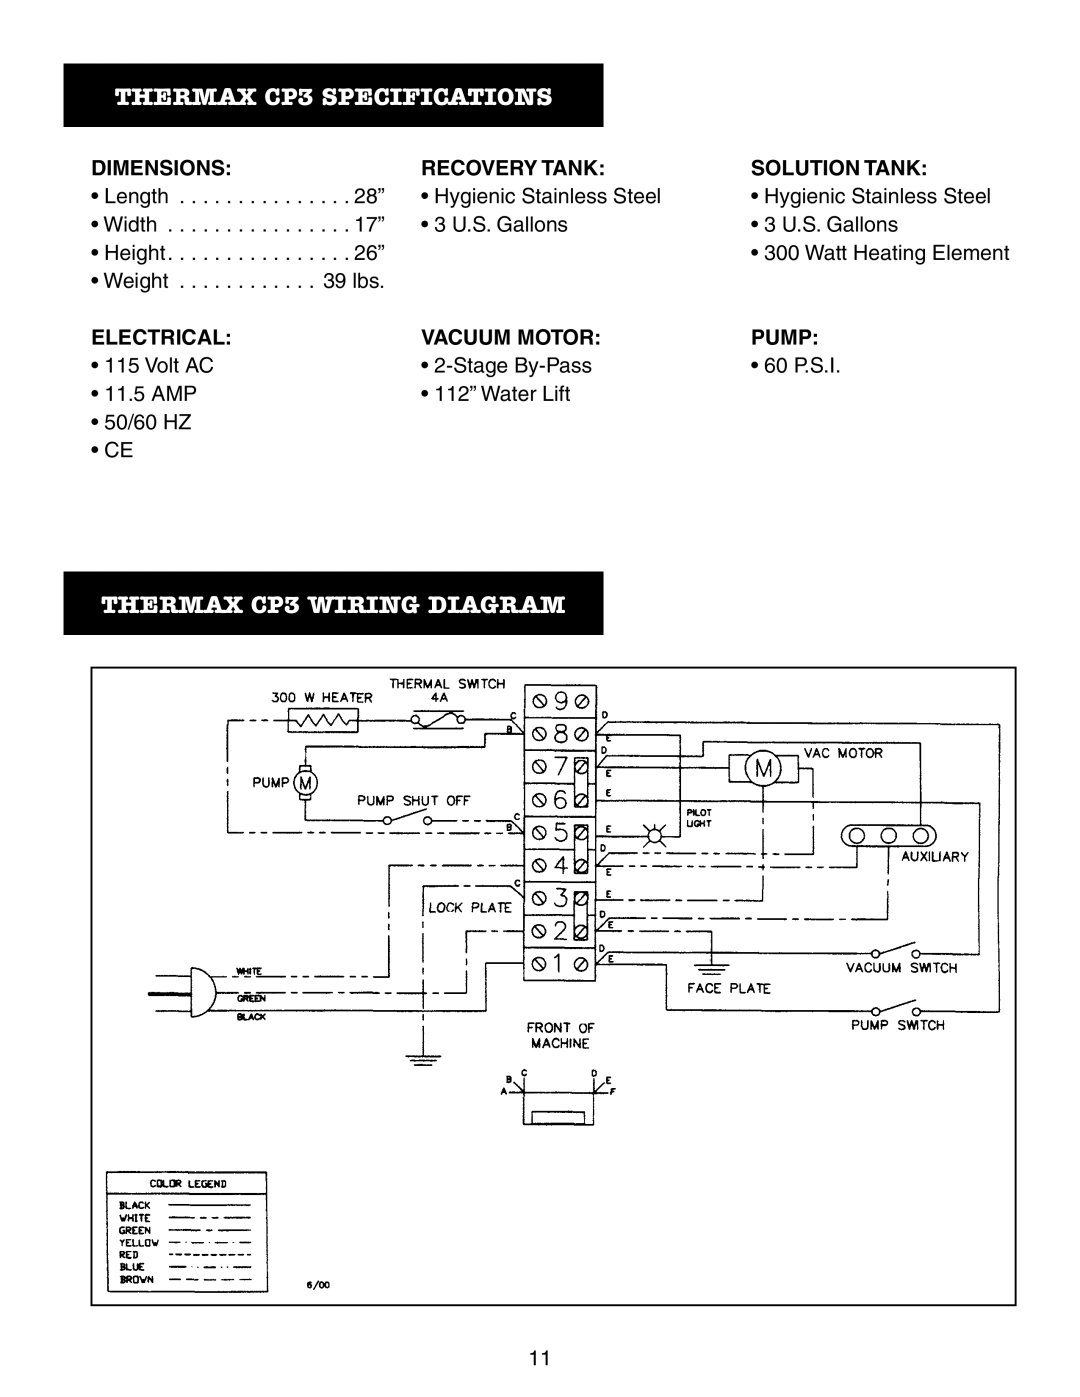 Thermax manual Thermax CP3 Specifications, Thermax CP3 Wiring Diagram 